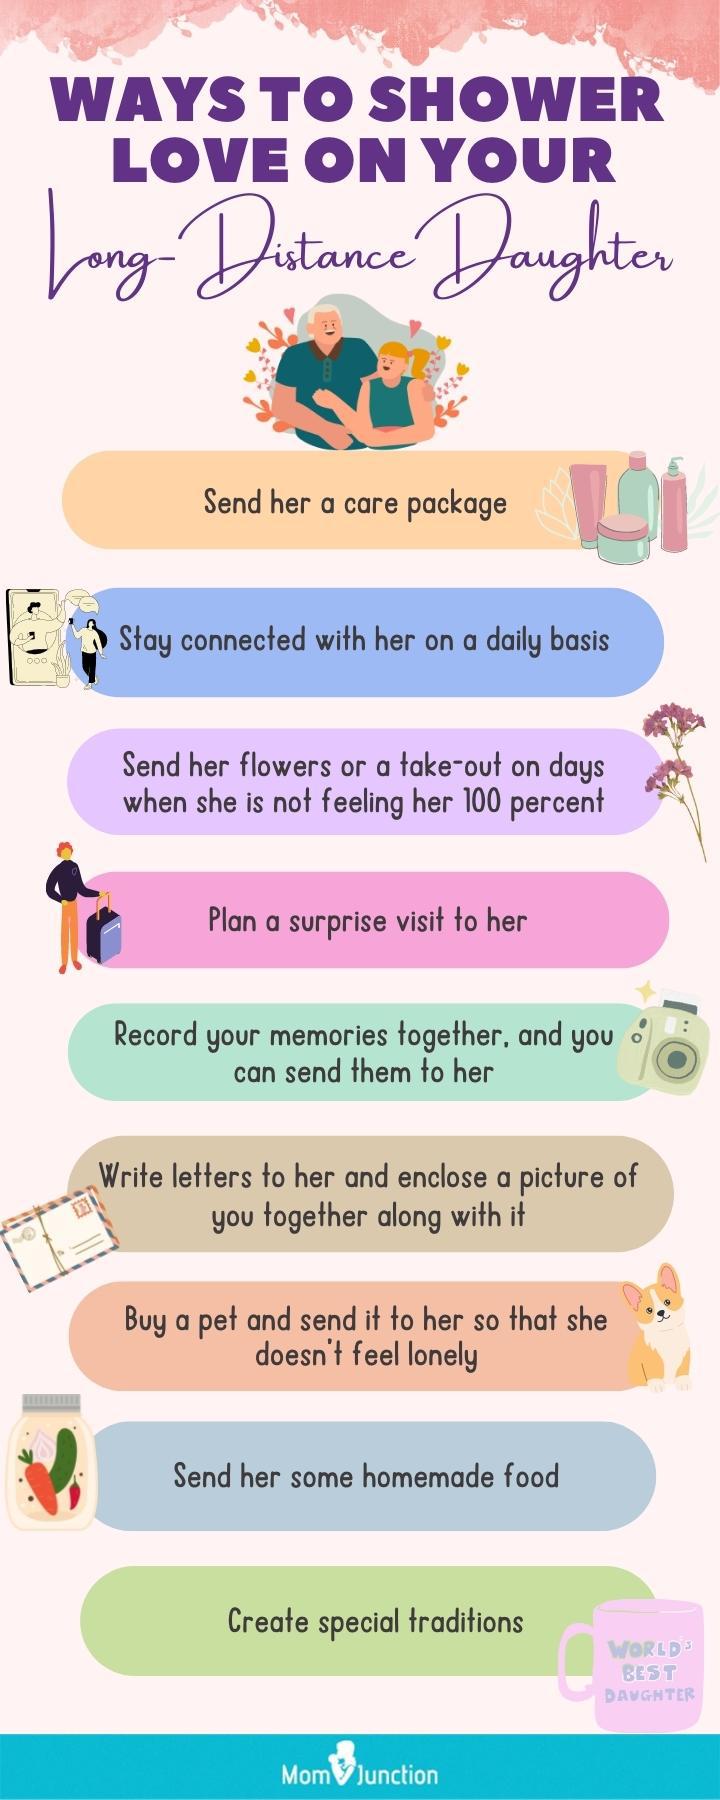 ways to shower your love on daughter [infographic]